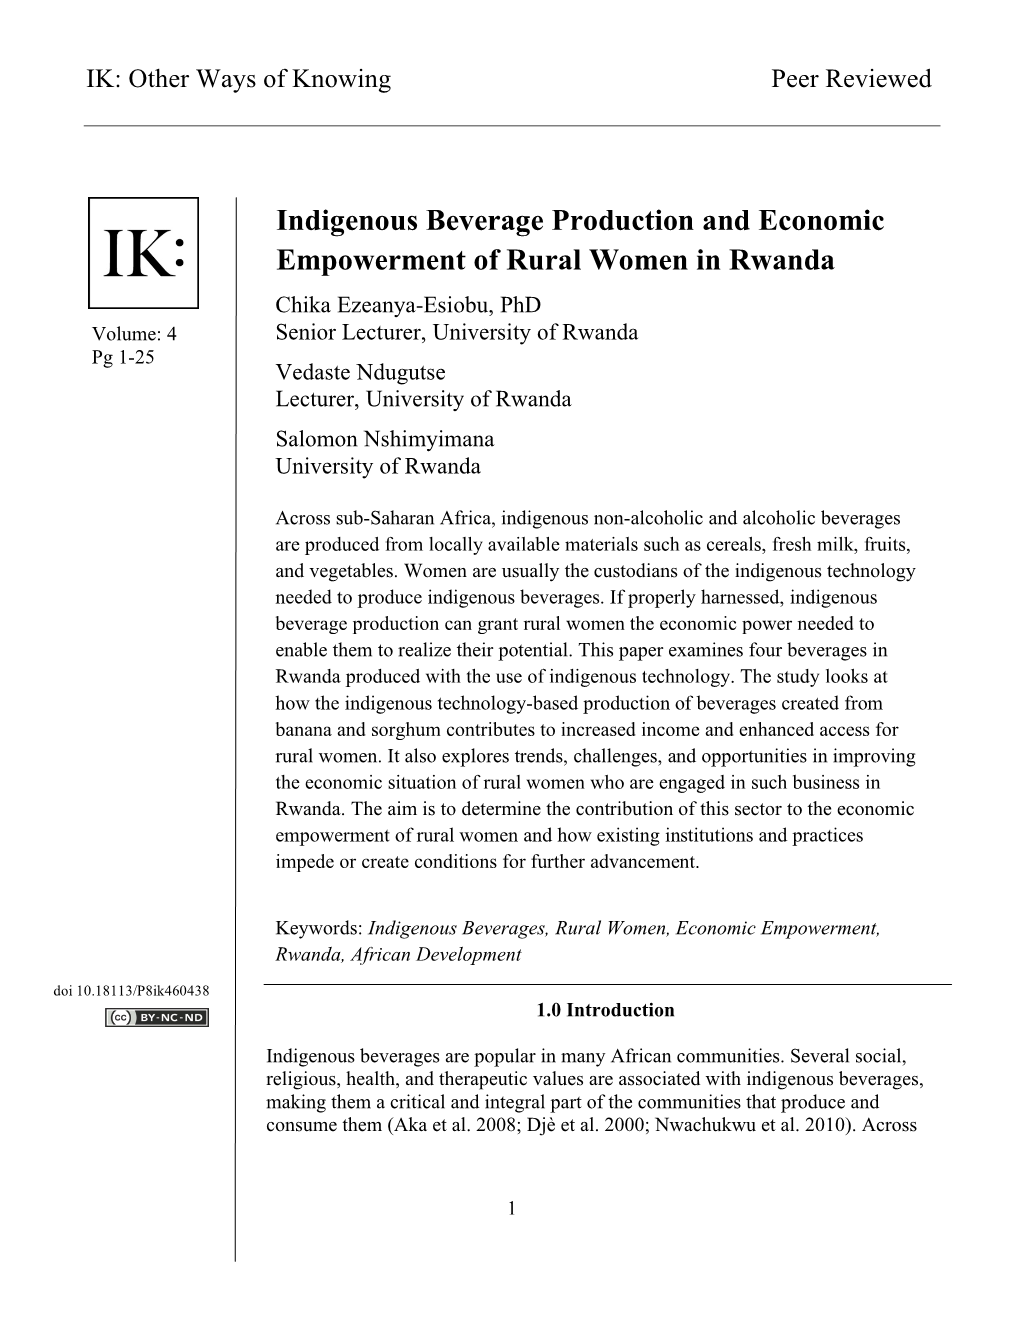 Indigenous Beverage Production And